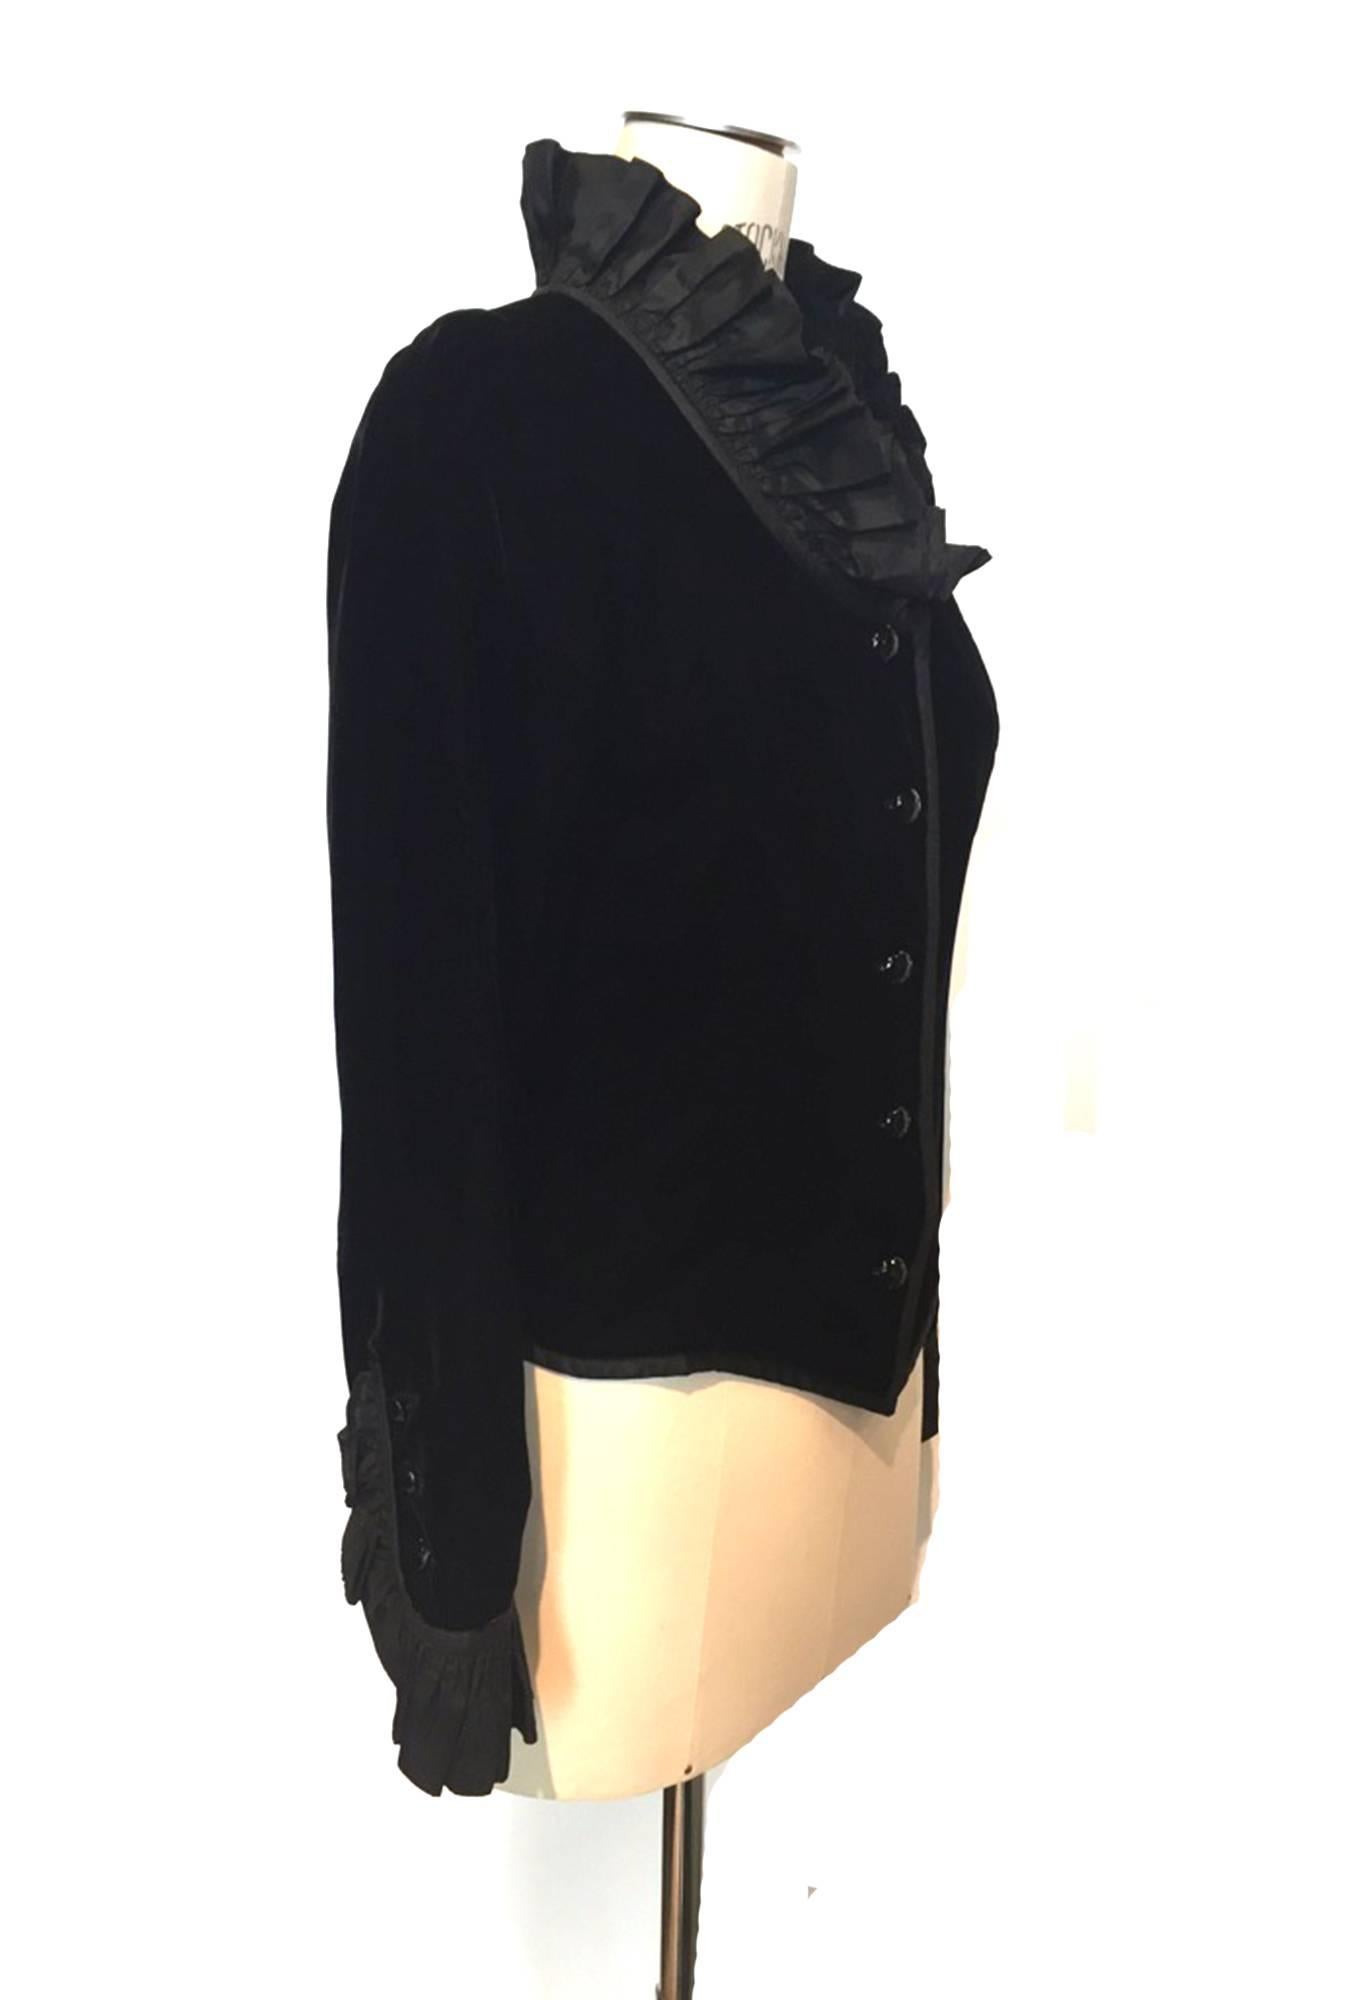 A Rare vintage classic from the fashion master Yves Saint Laurent. Jacket is softly shaped with black velvet fabric, pleated front and back moire neck detail, also on sleeve cuffs. A collectable Saint Laurent (YSL) vintage piece.